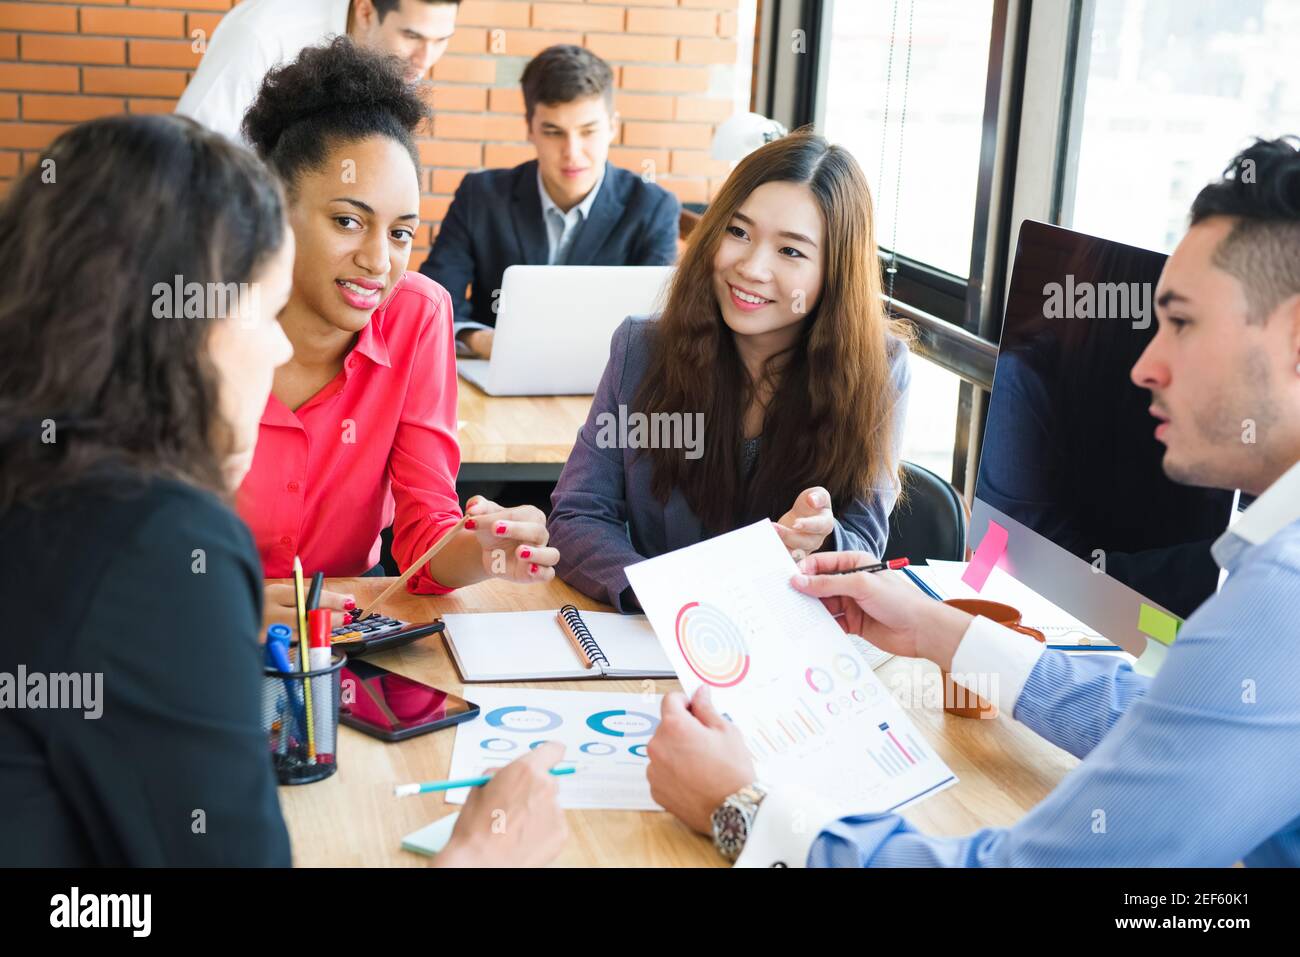 Multiethnic business people having a meeting in co-working space Stock Photo